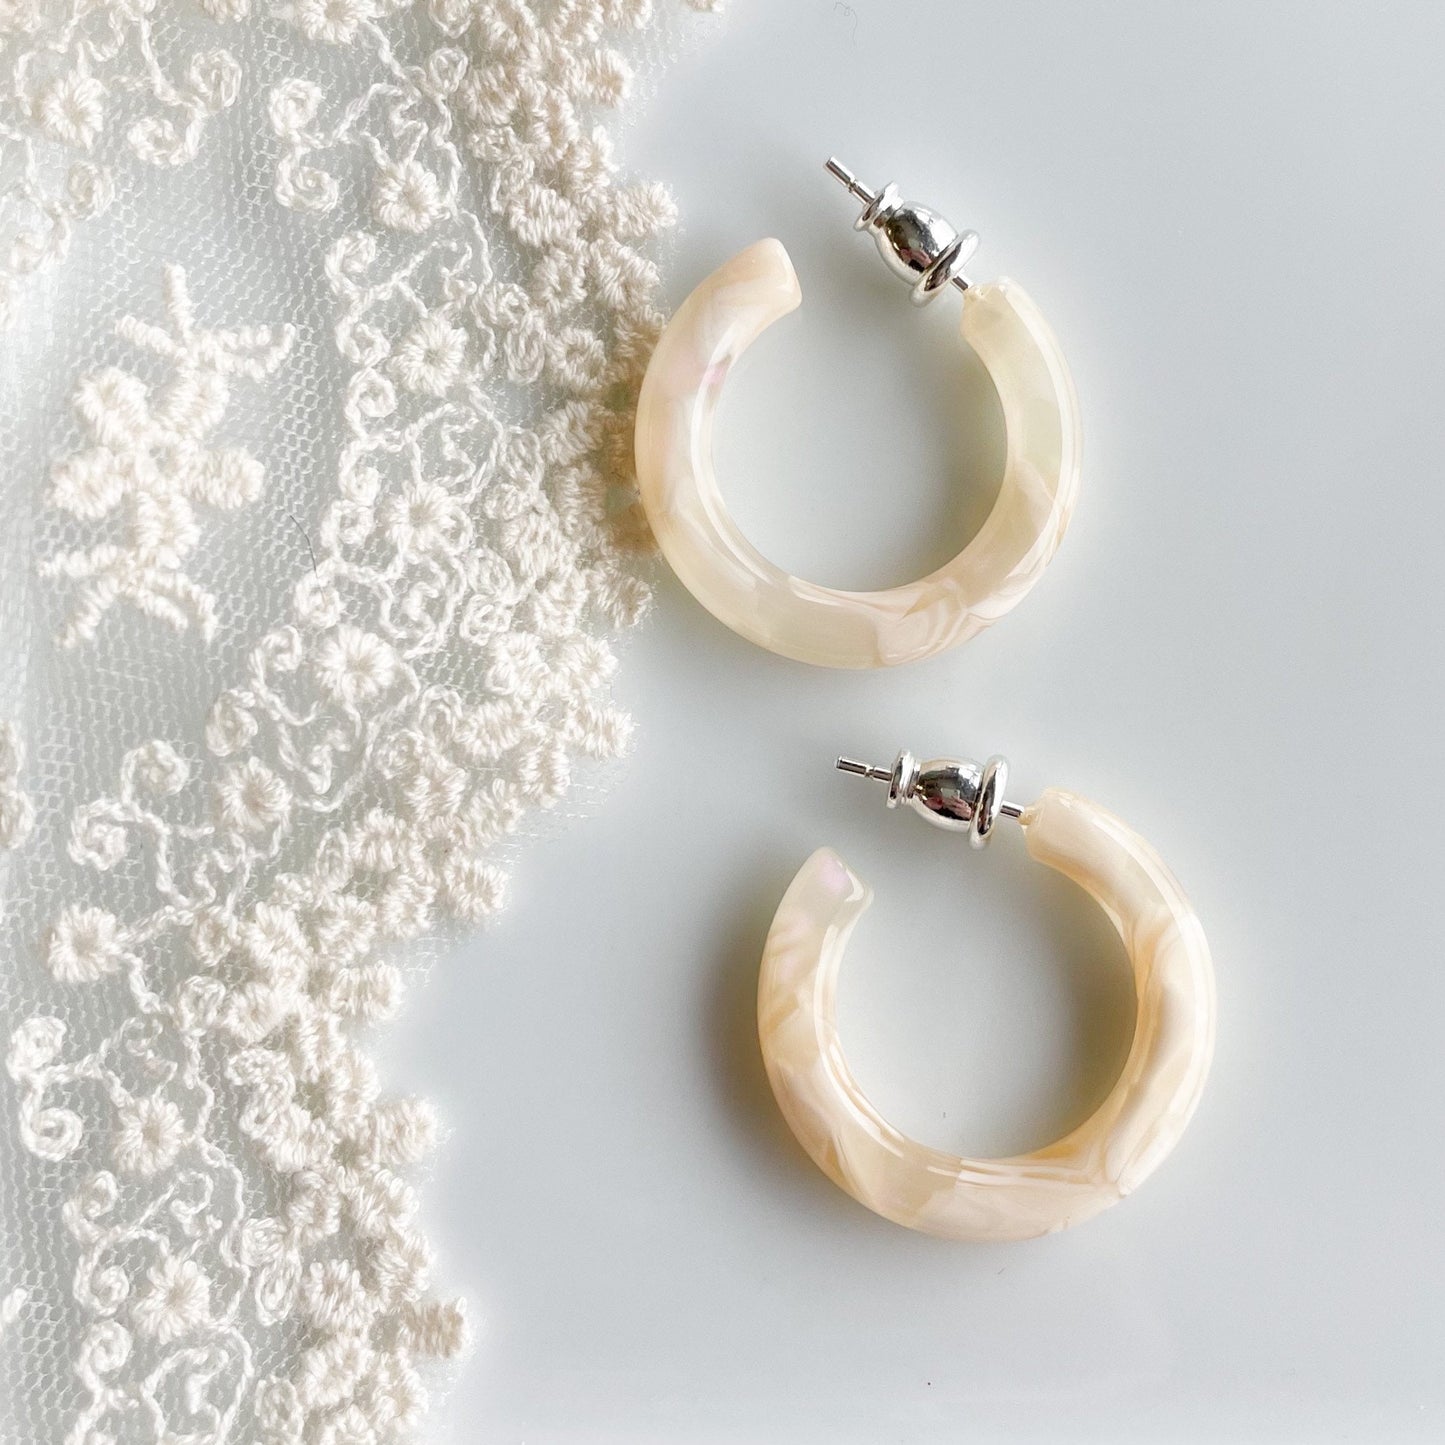 Ultra Mini Hoops in Angel Wing | White and Iridescent Swirl Hoop Earrings 925 Sterling Silver Posts